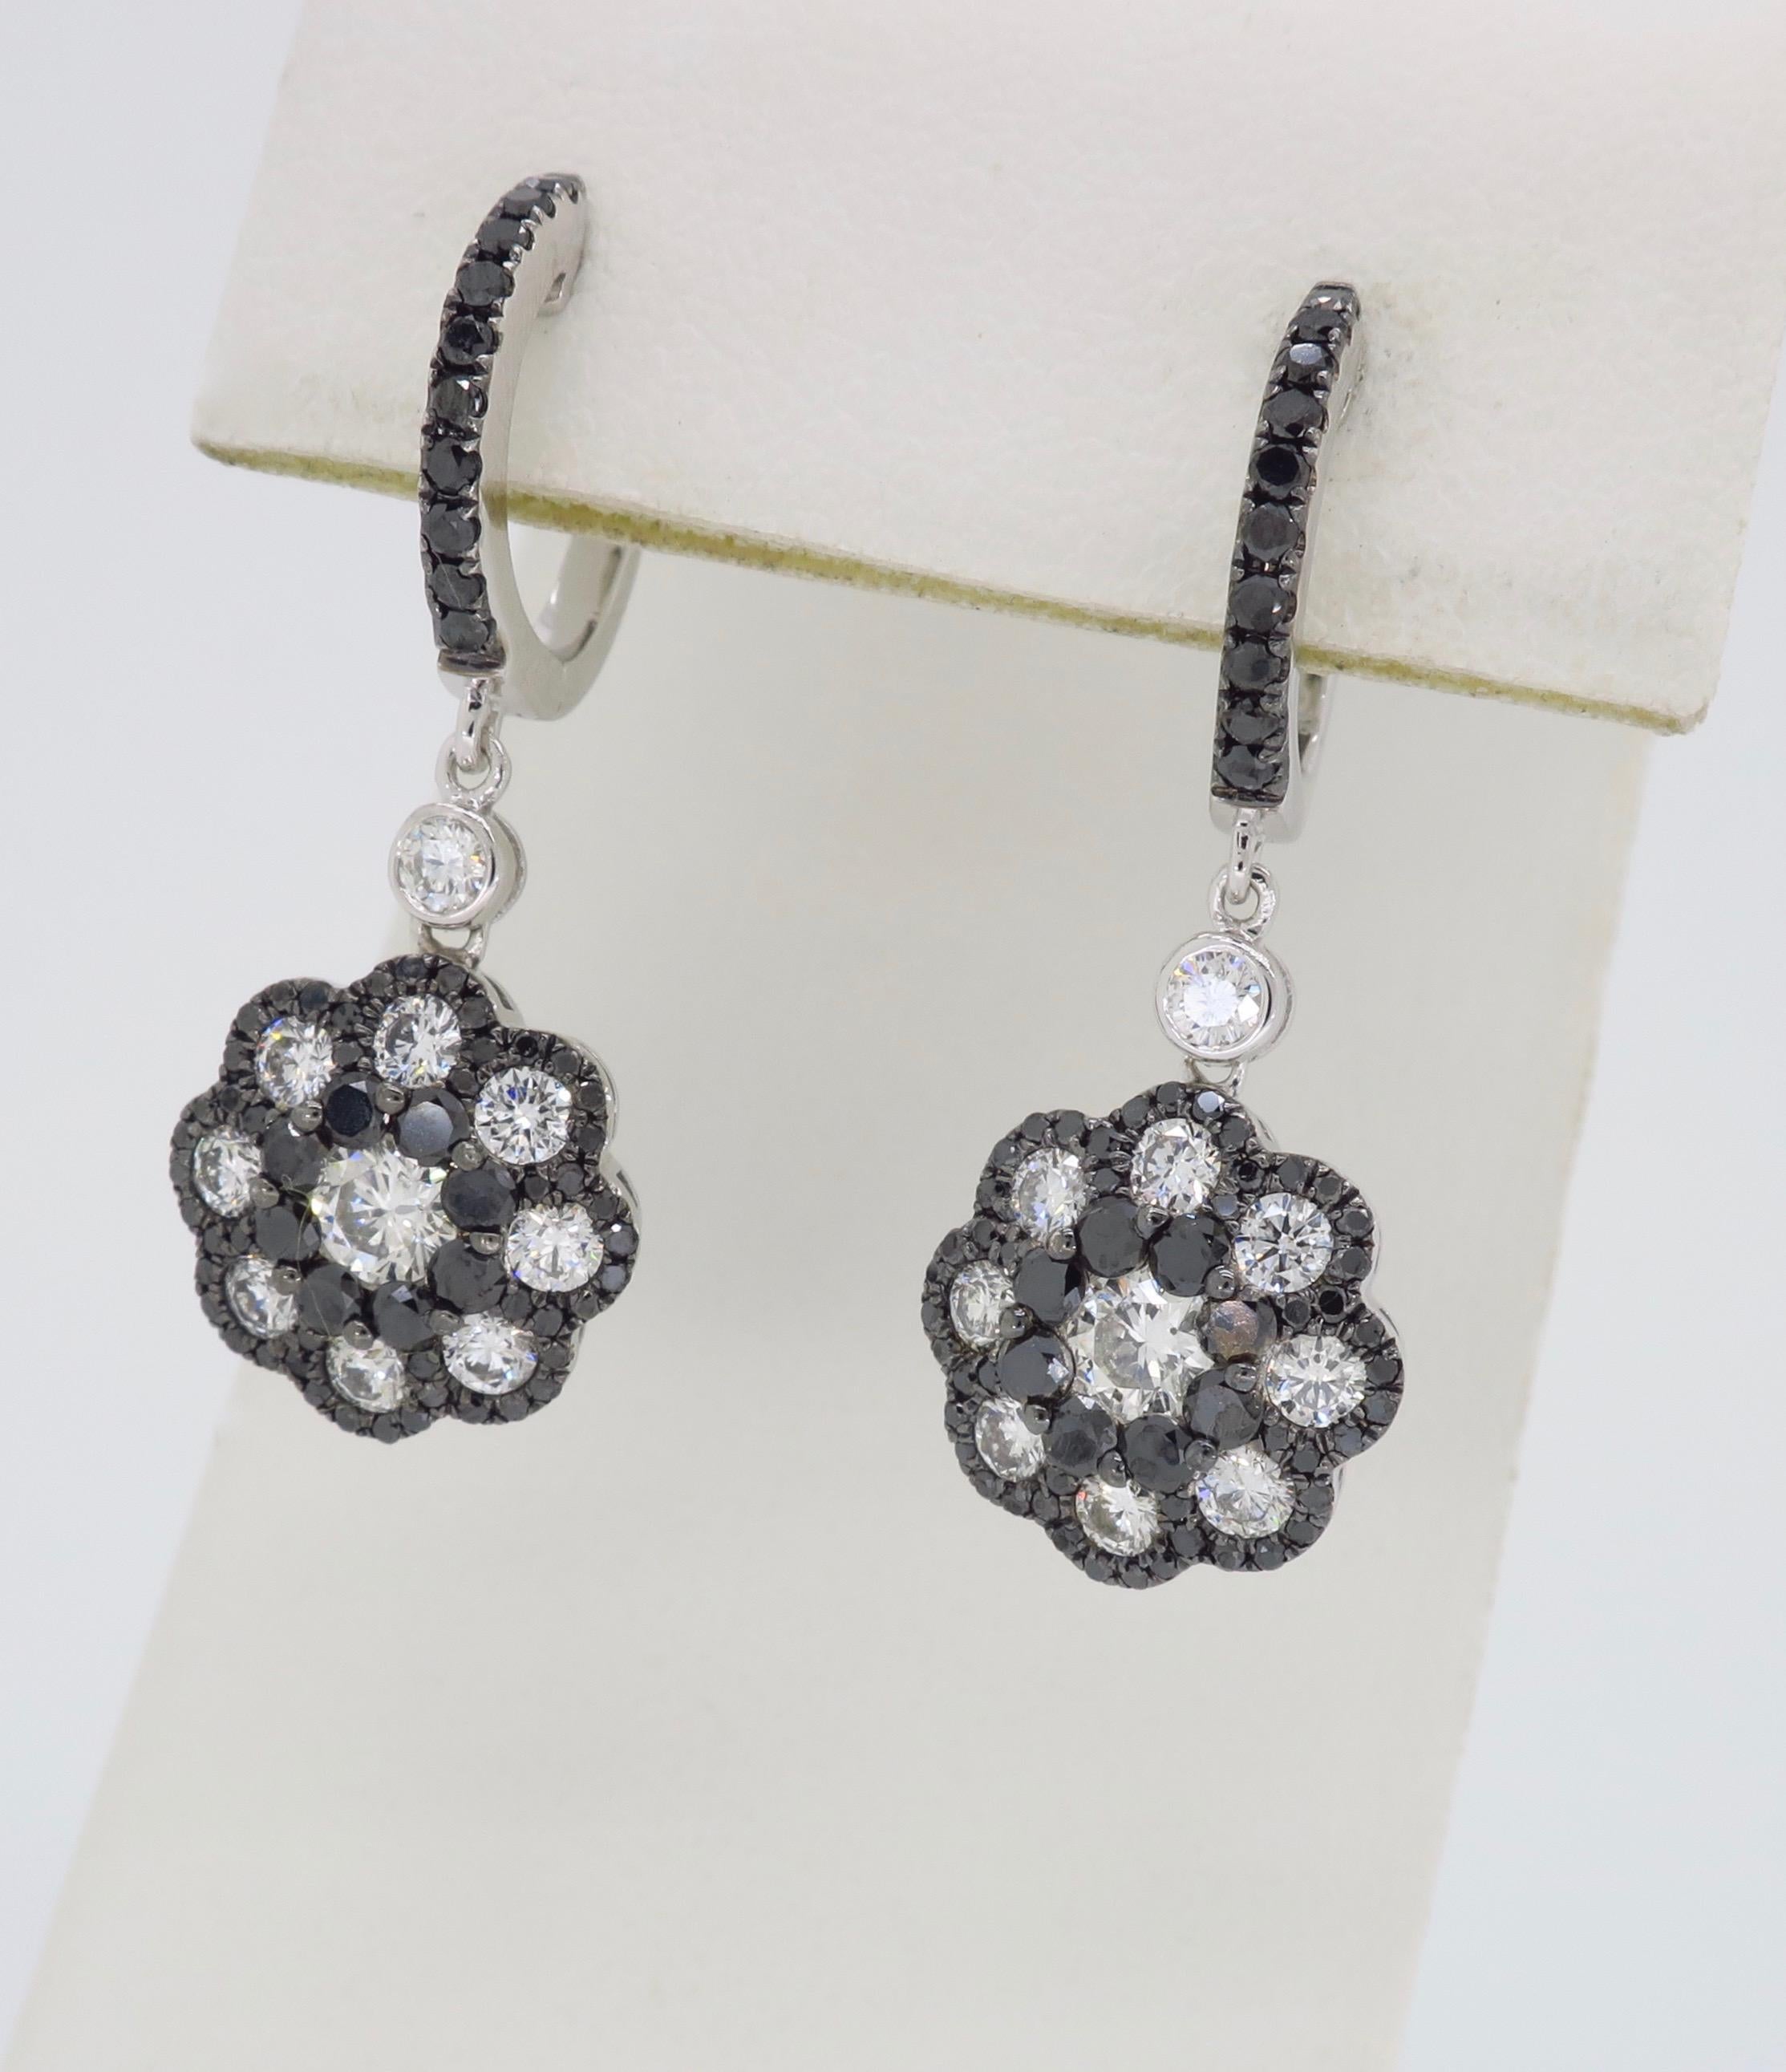 Floral designed black and white diamond dangle earrings crafted in white gold.

Diamond Carat Weight: Approximately 2.21CTW 
Diamond Cut: Round Brilliant Diamonds
Color: 134 Black Diamonds, 20 with Average G-I in color
Clarity: Average SI
Metal: 14K